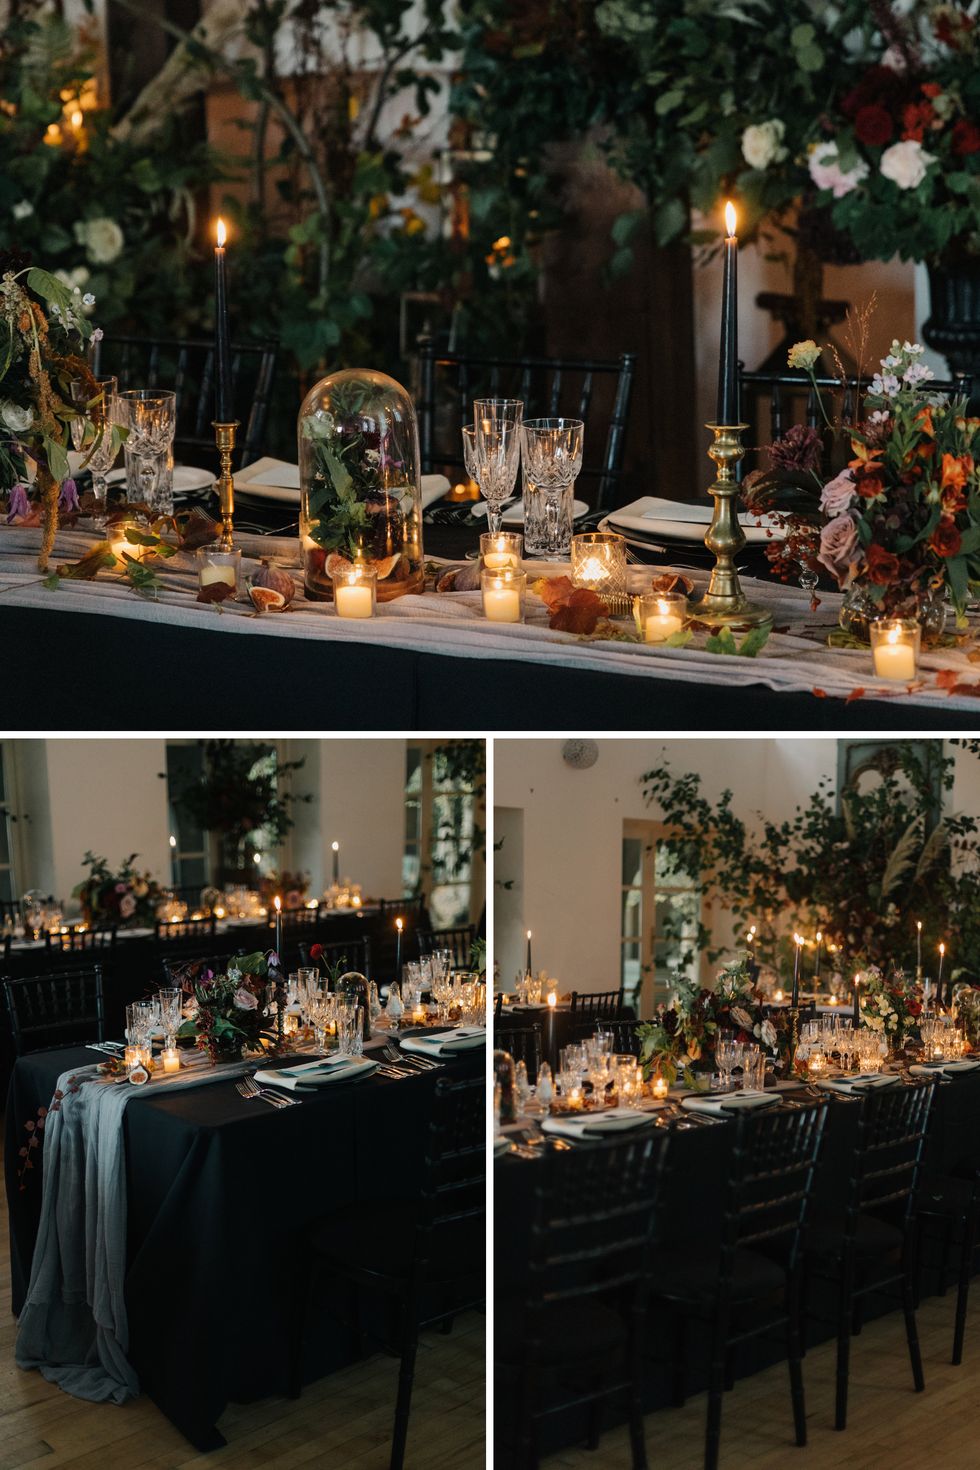 Buffet, Rehearsal dinner, Lighting, Centrepiece, Table, Wedding reception, Meal, Tree, Tablecloth, Christmas, 